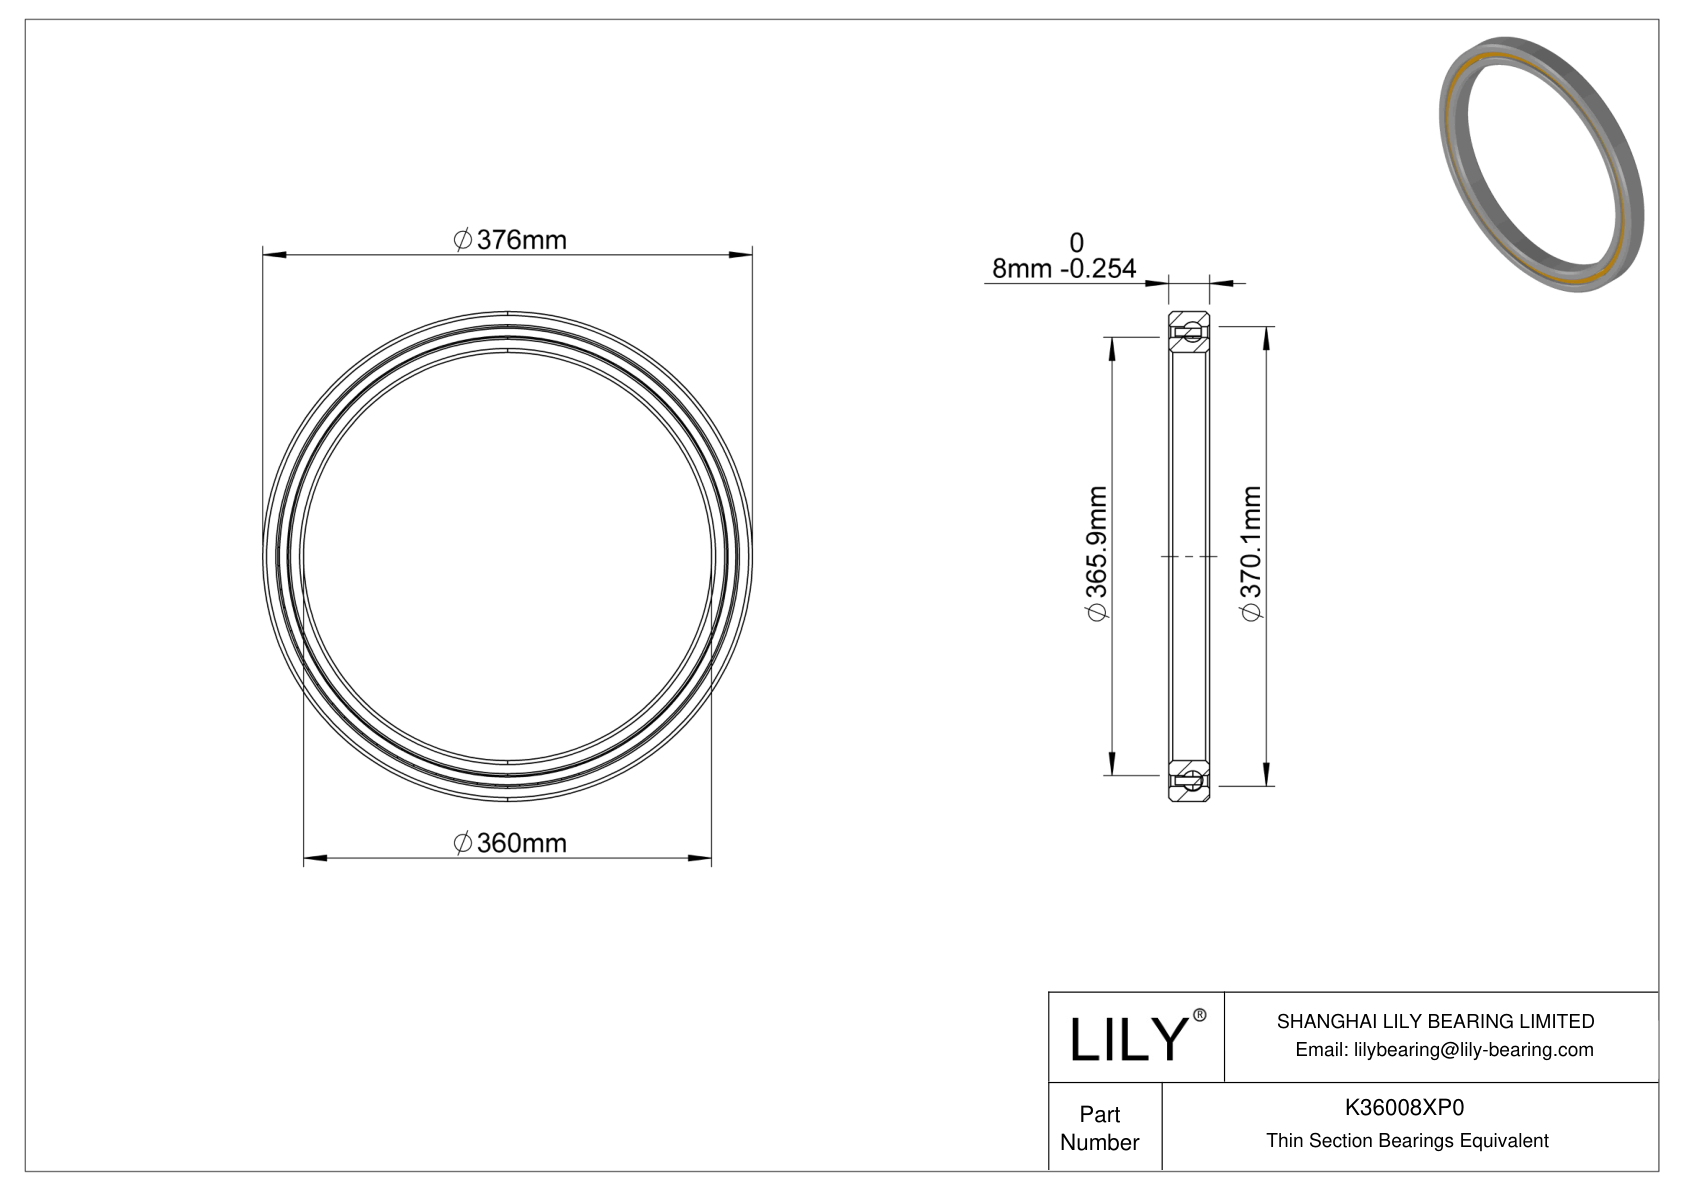 K36008XP0 Constant Section (CS) Bearings cad drawing